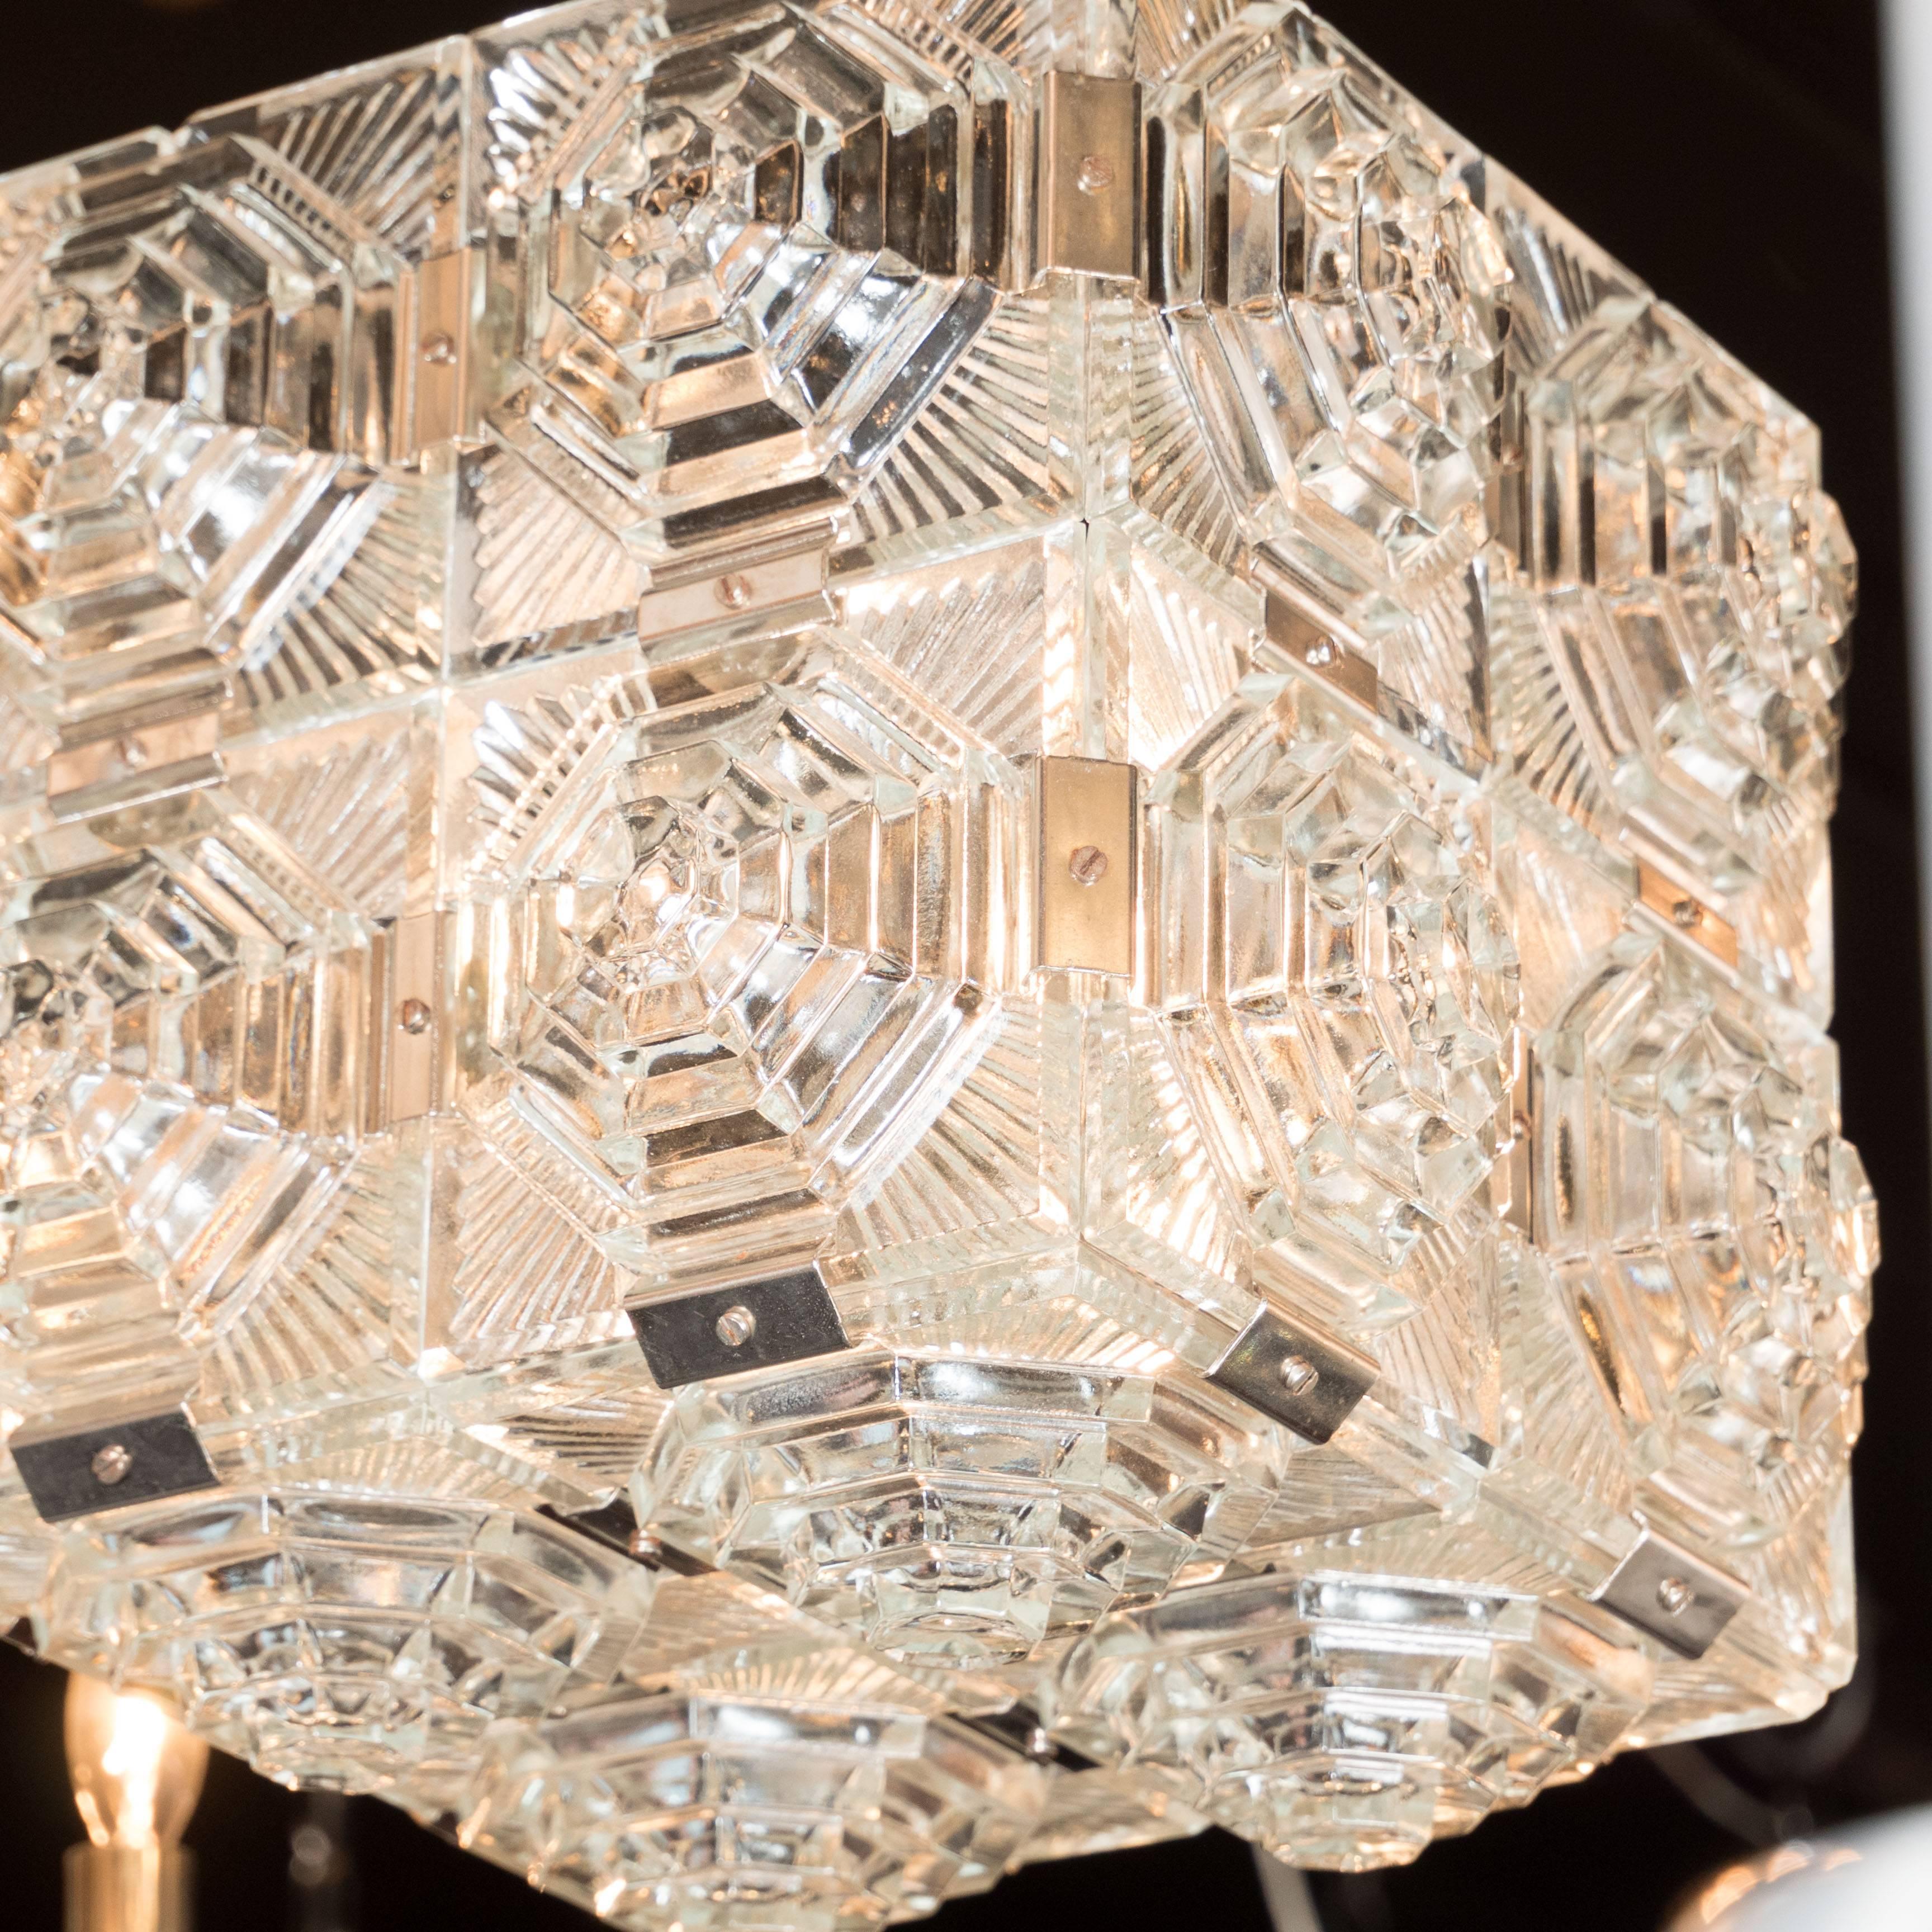 A Mid-Century Modernist pendant of textured glass panels with chrome fittings. Each side features four panels of etched glass featuring radial symmetry. Flat chrome connectors appear throughout. This piece hangs by a single rod and conical ceiling